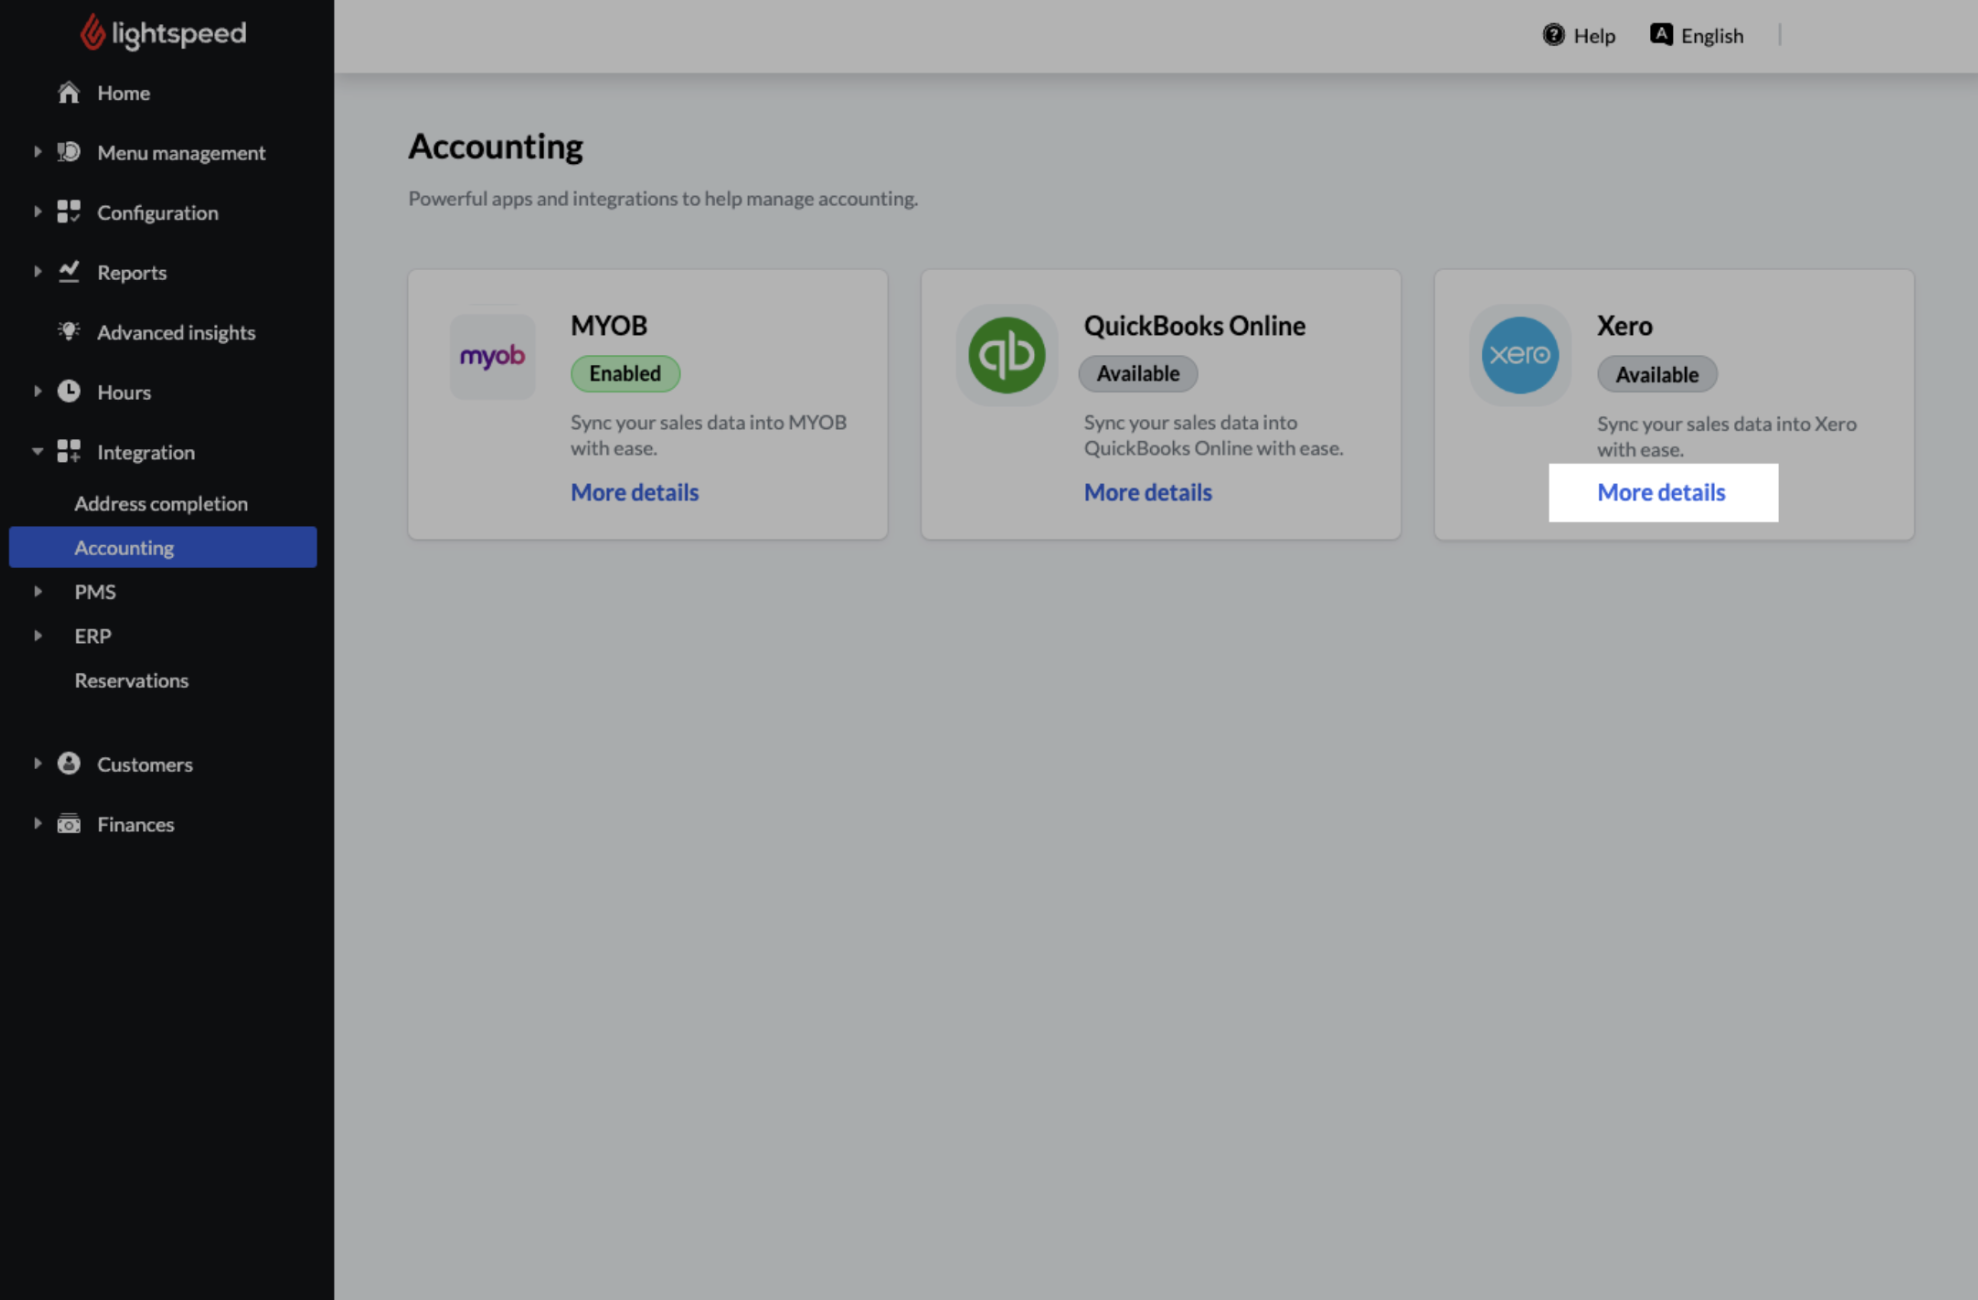 Accounting integrations page with More details highlighted on the Xero tile